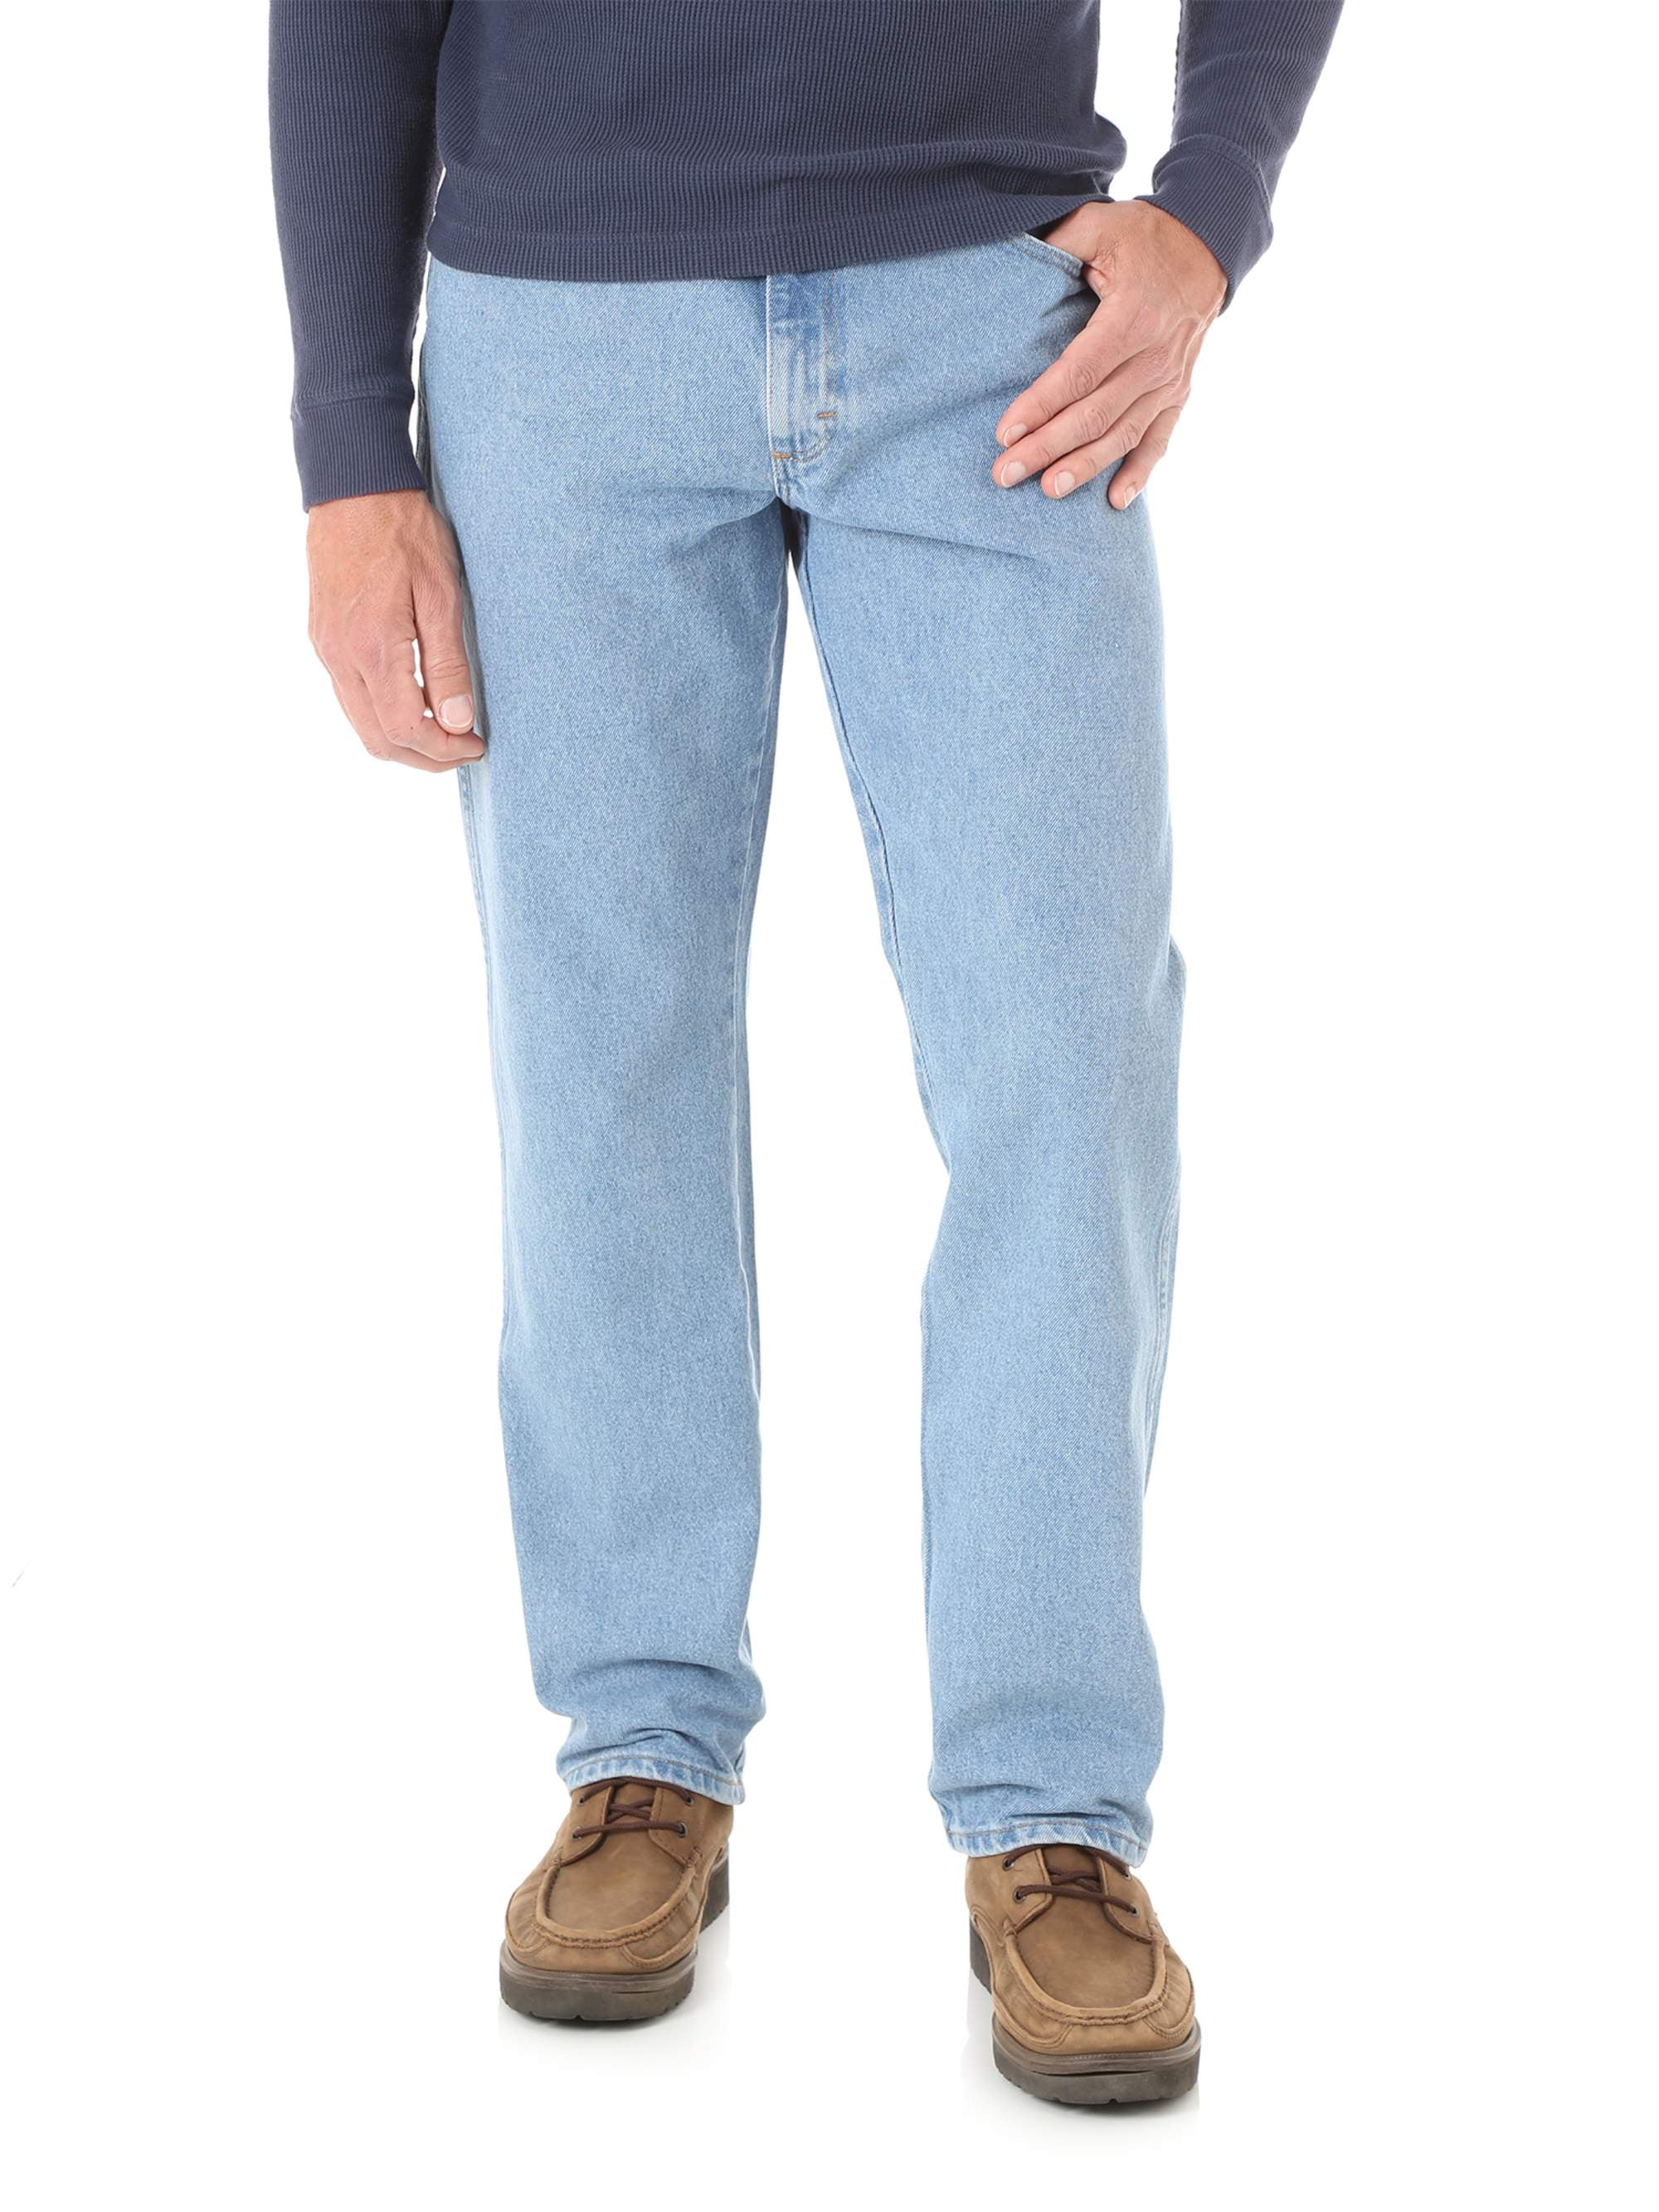 Rustler and Big Men's Relaxed Fit Jeans - Walmart.com